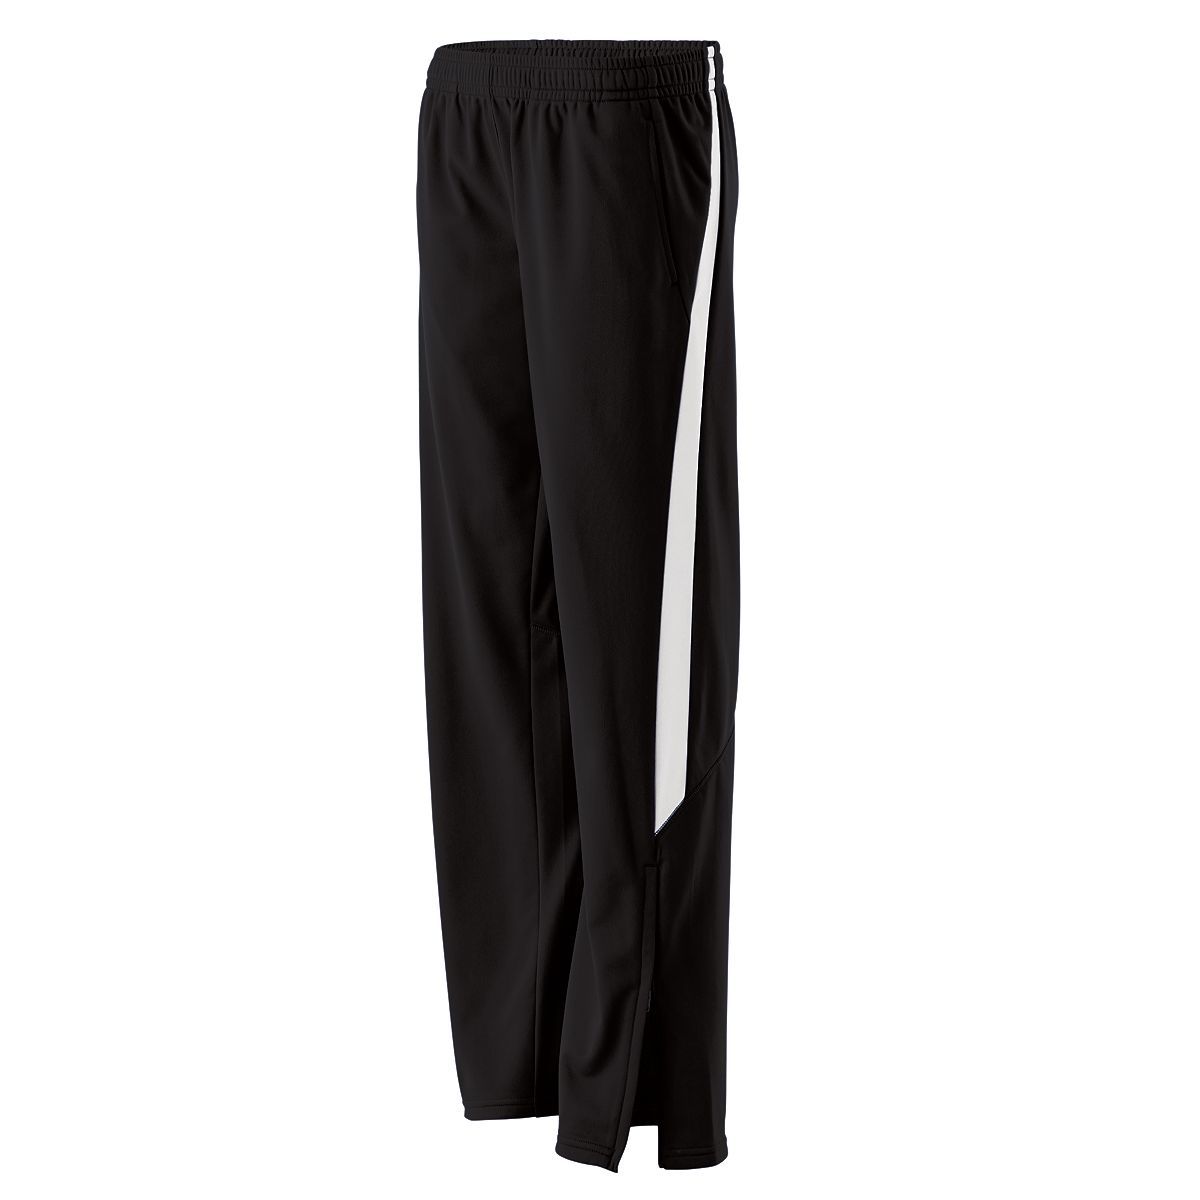 Holloway Ladies Determination Pant in Black/White  -Part of the Ladies, Ladies-Pants, Pants, Holloway product lines at KanaleyCreations.com